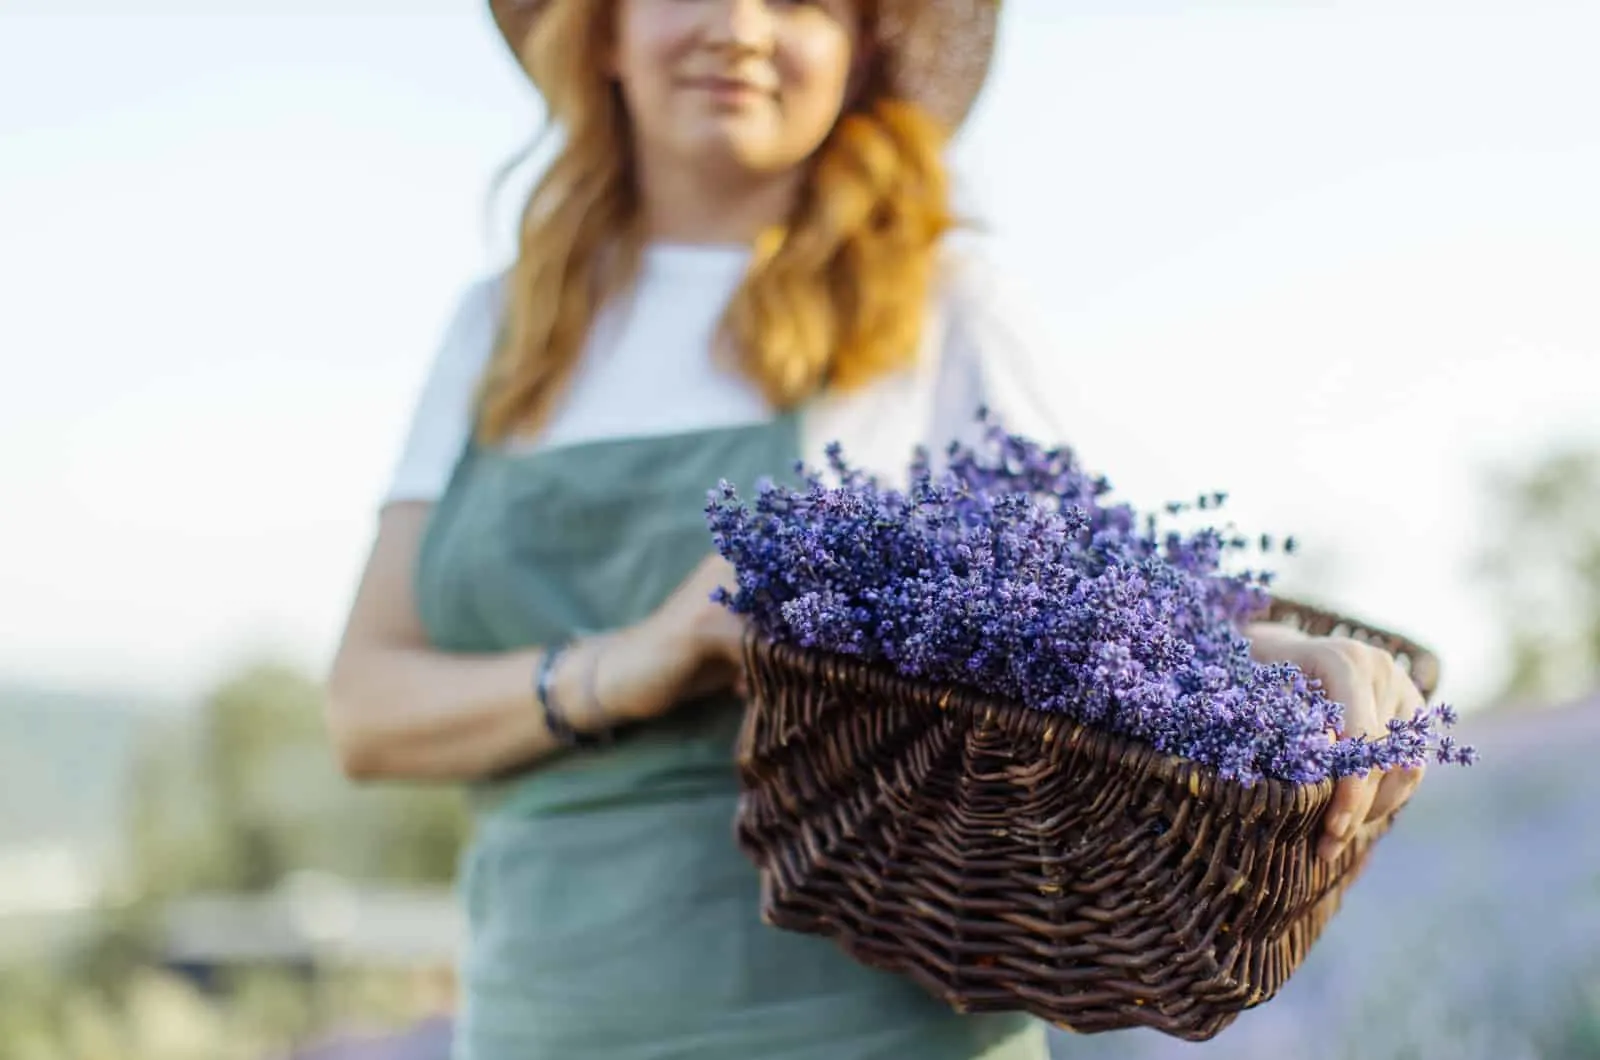 woman holding a basket of lavender flowers